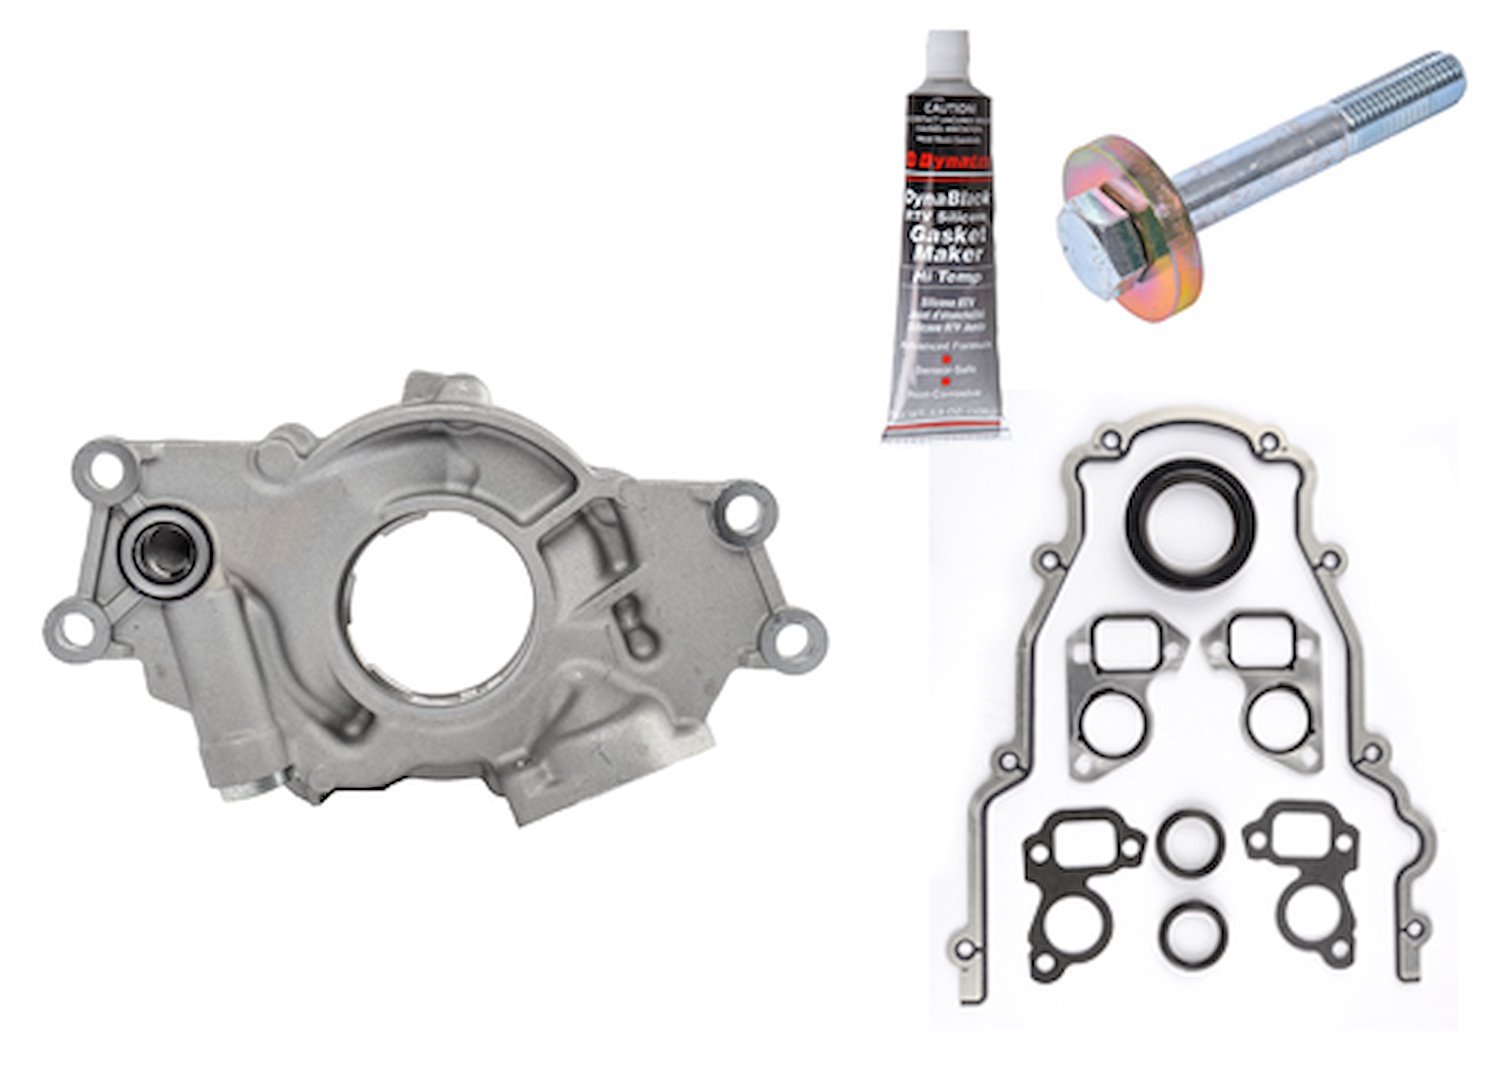 Oil Pump with Timing Cover Gasket Set and Balancer Bolt for GM LS [High Volume, High Pressure]